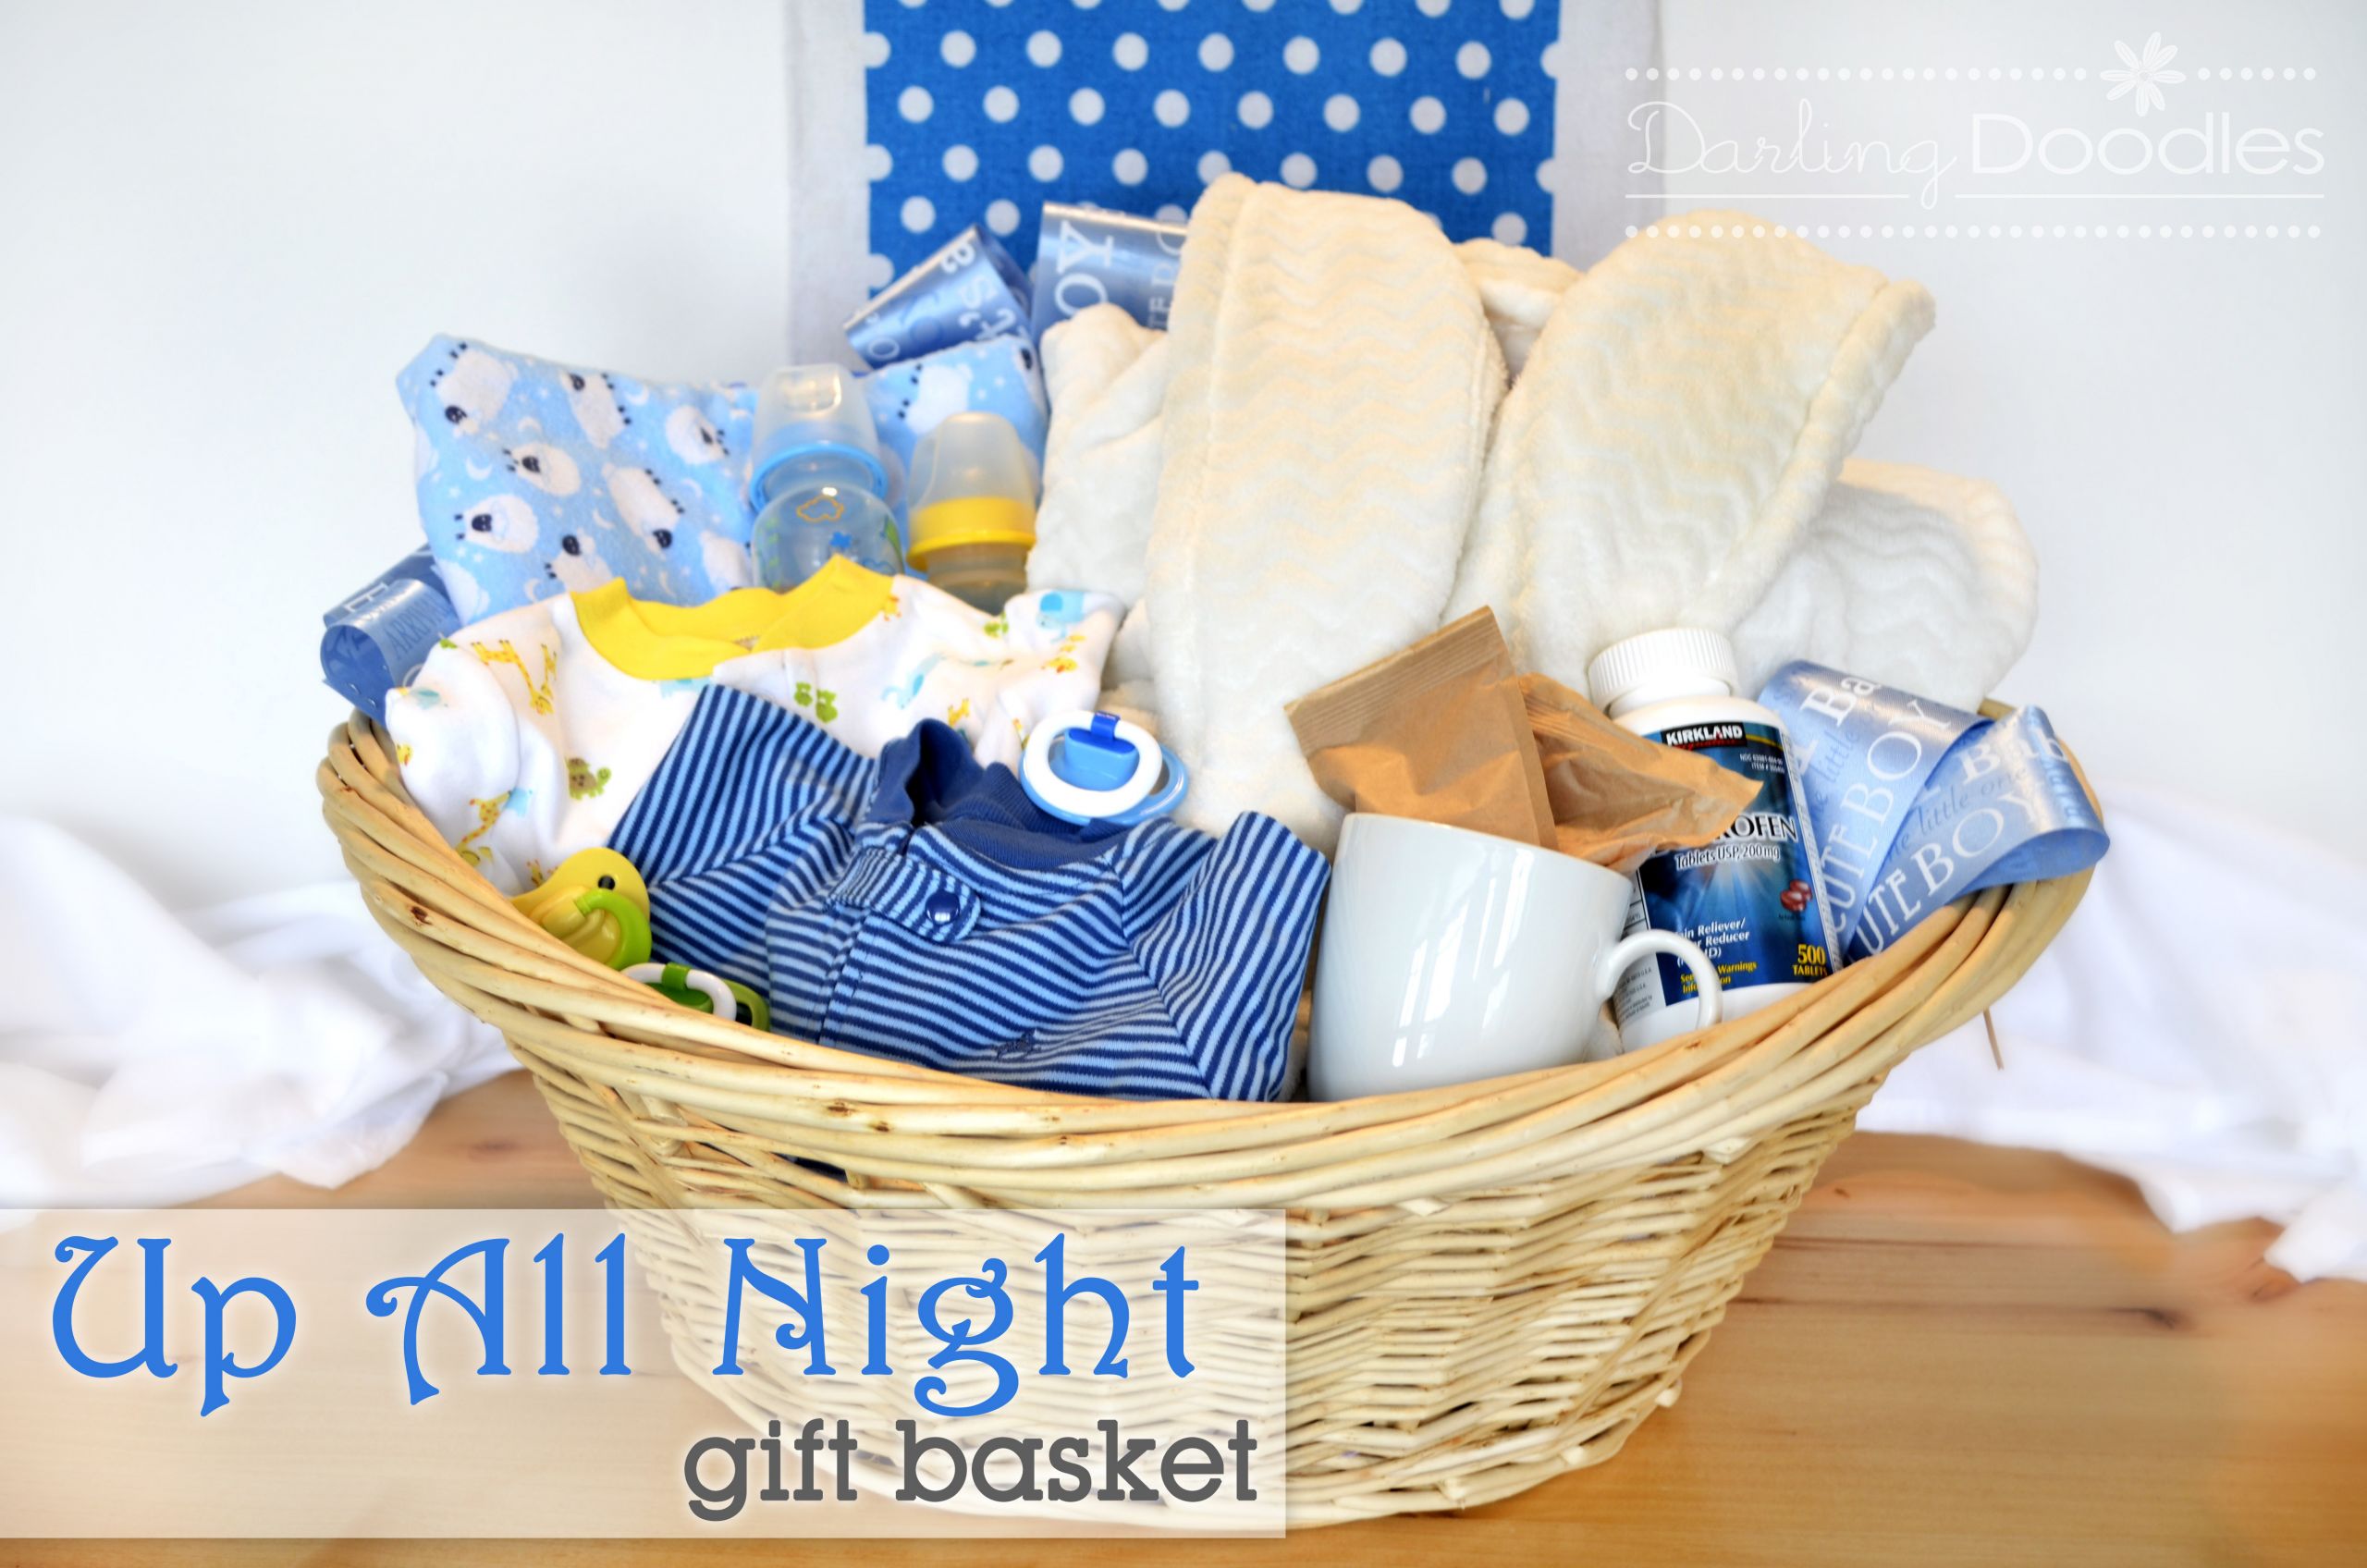 Ideas For Baby Shower Gift Baskets
 Up All Night Survival Kit Darling Doodles